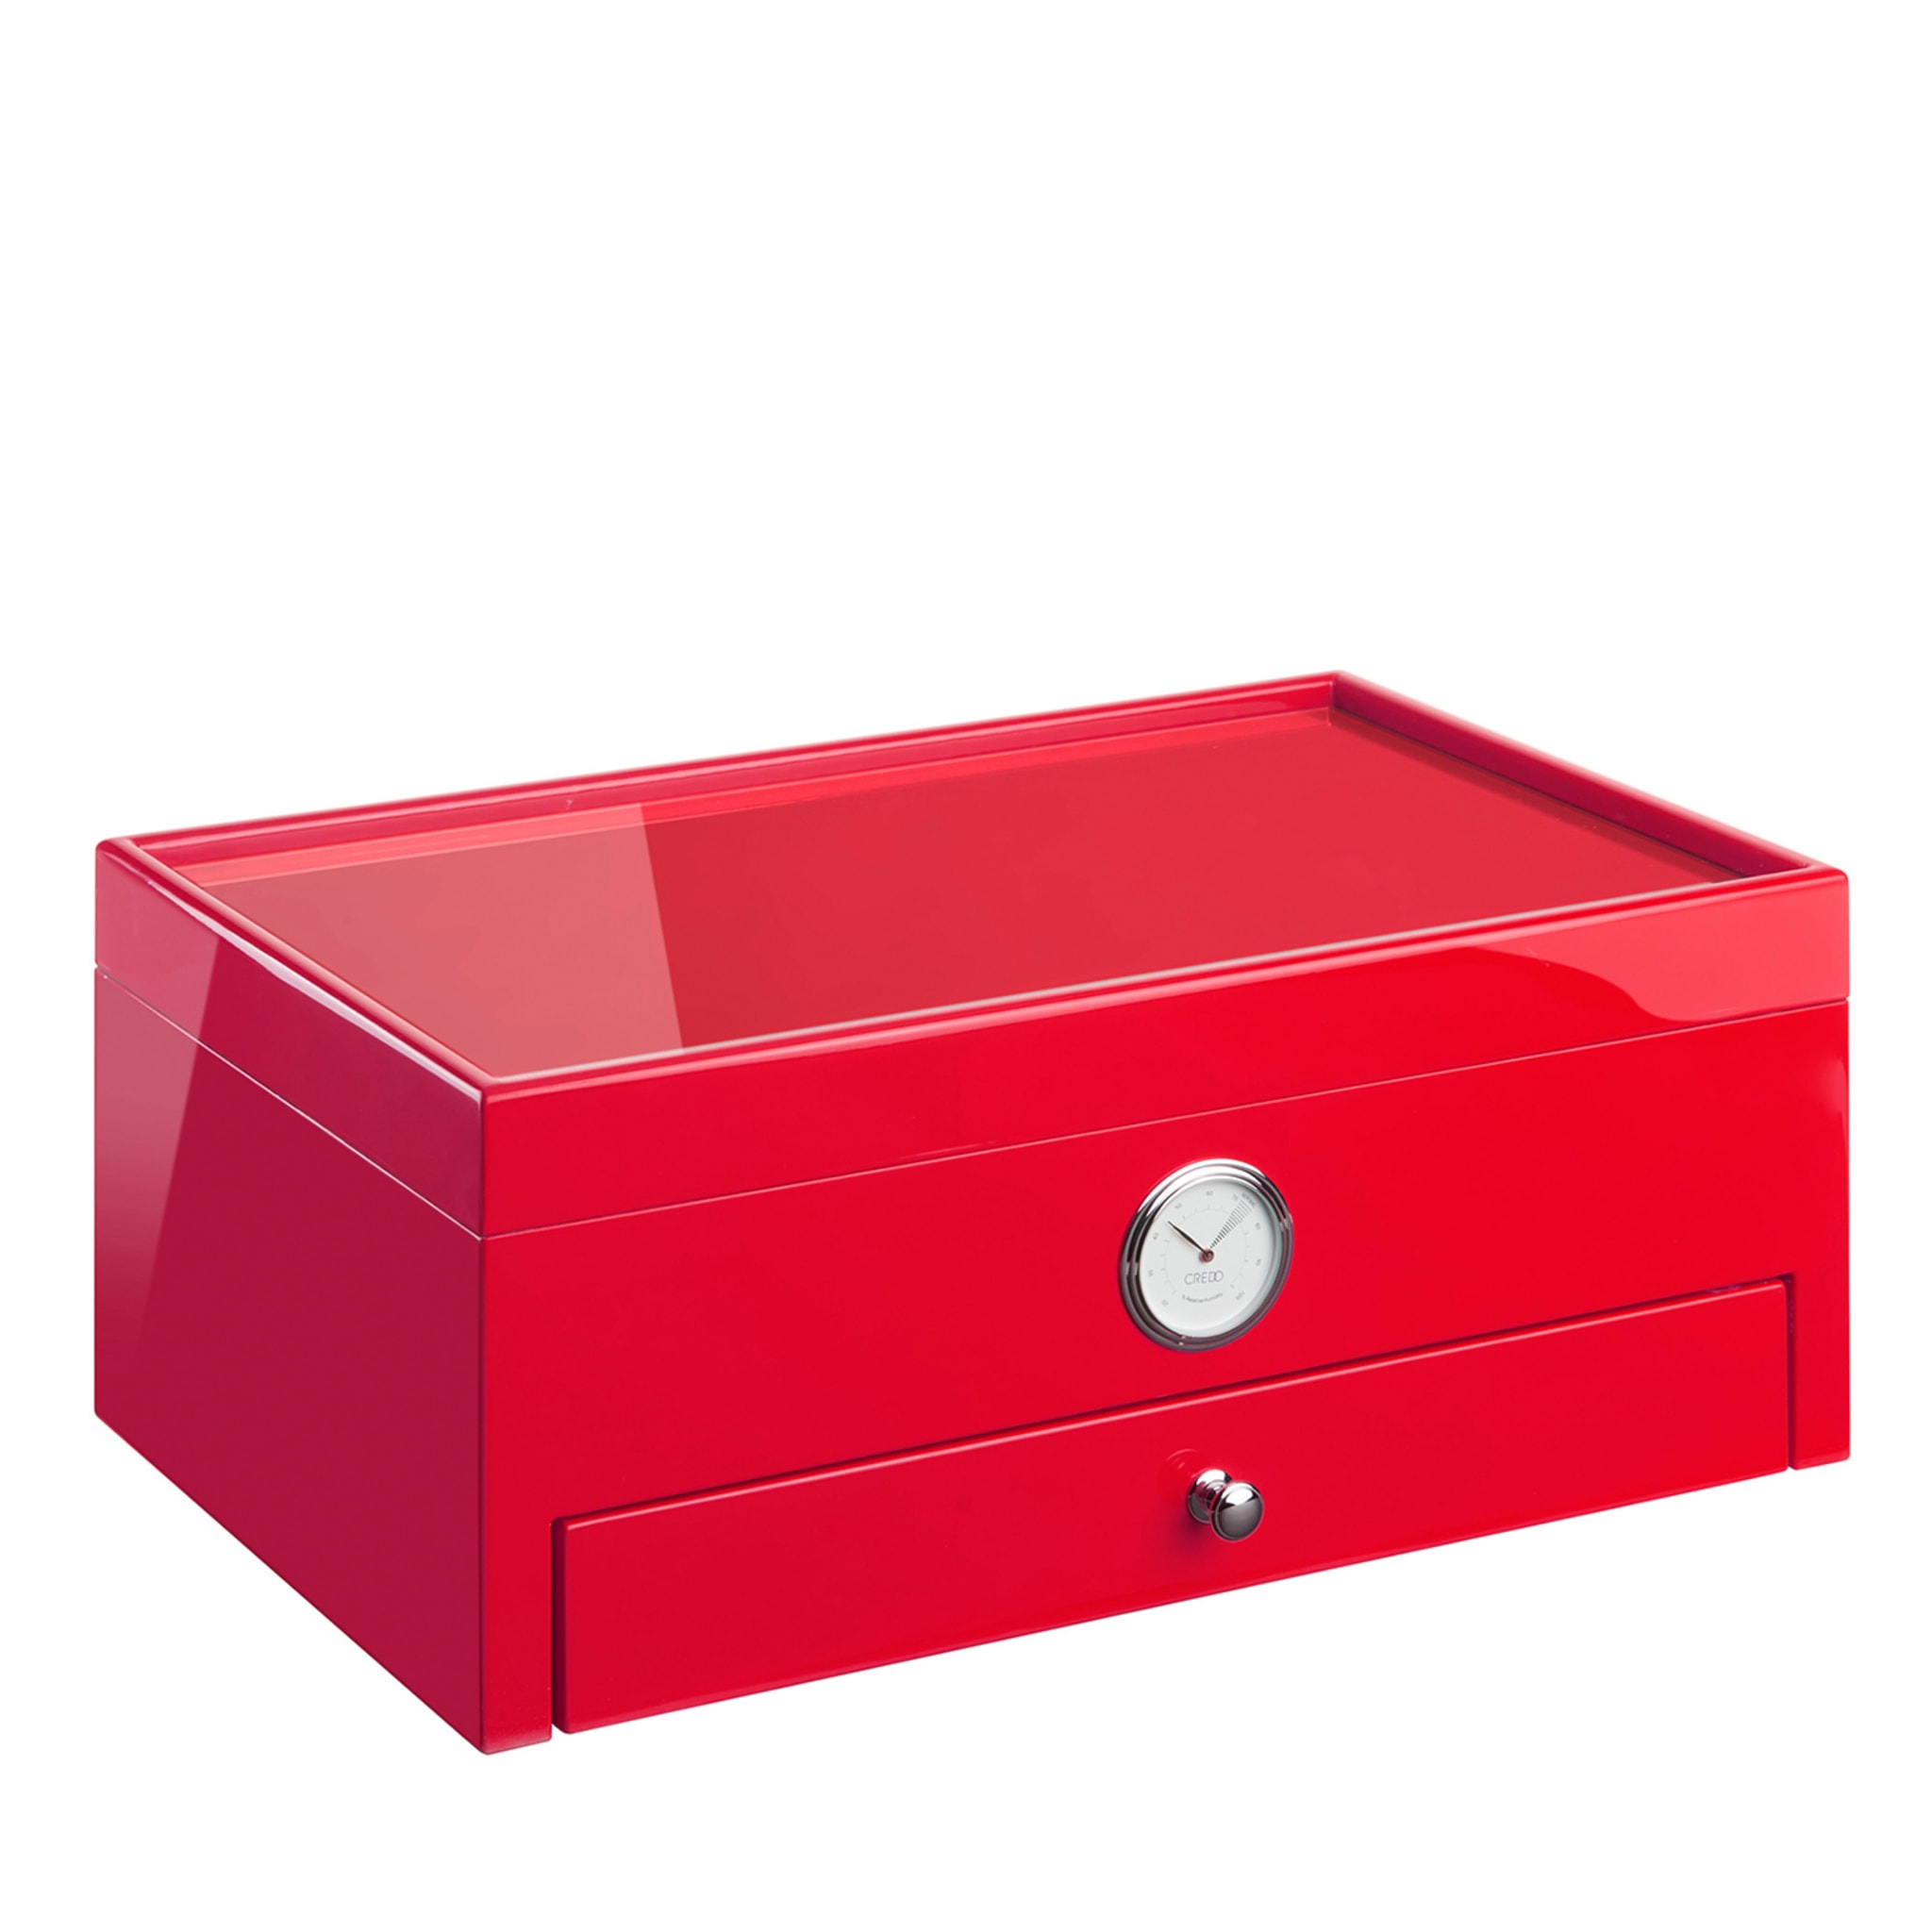 Full Color Red Humidor (Special Club Edition) - Main view